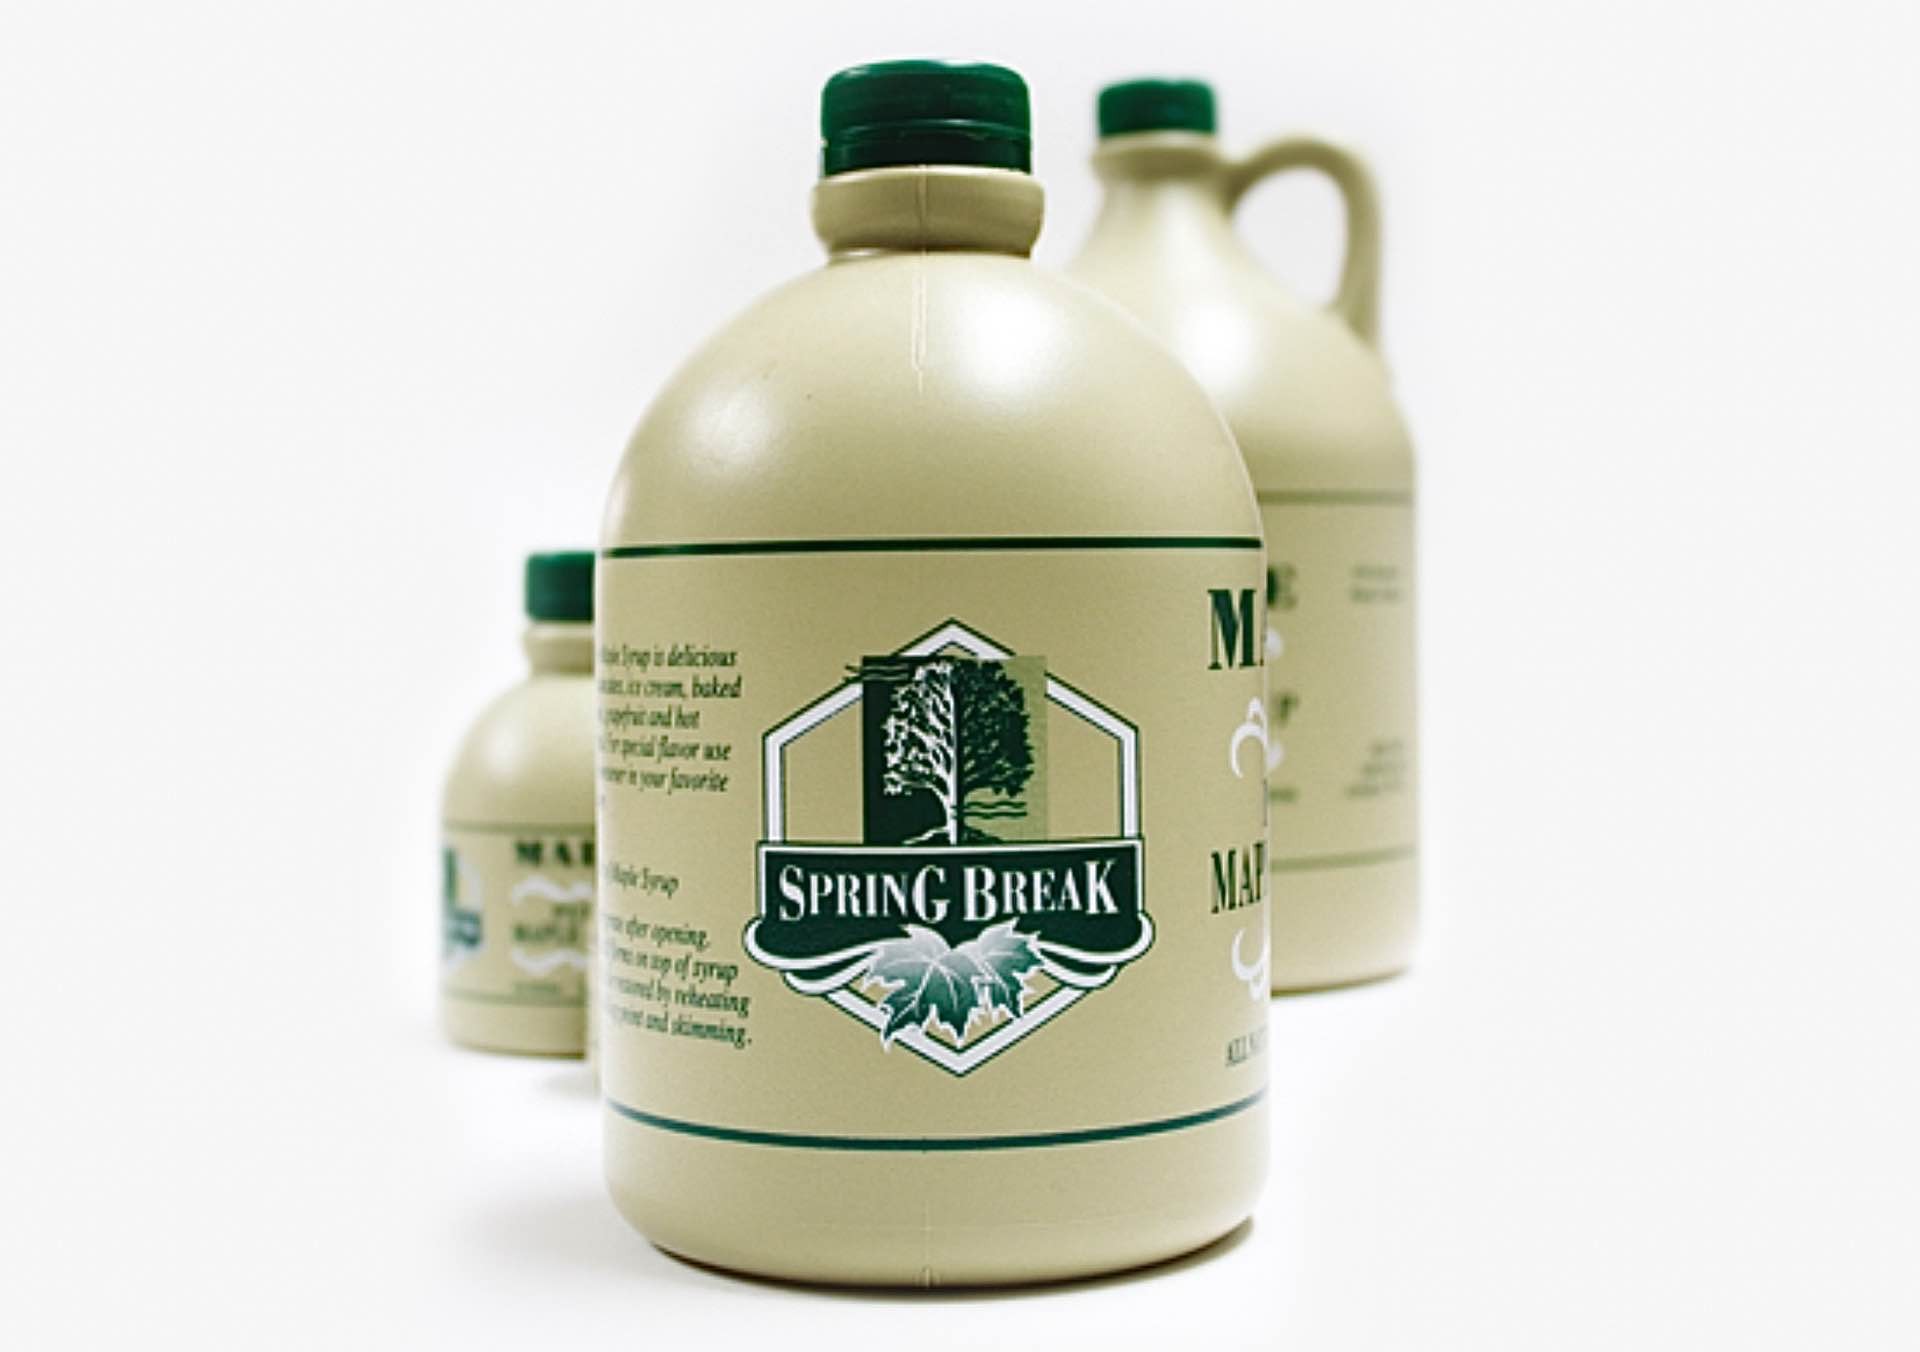 Spring Break pure Maine maple syrup. (Price varies by size/type)